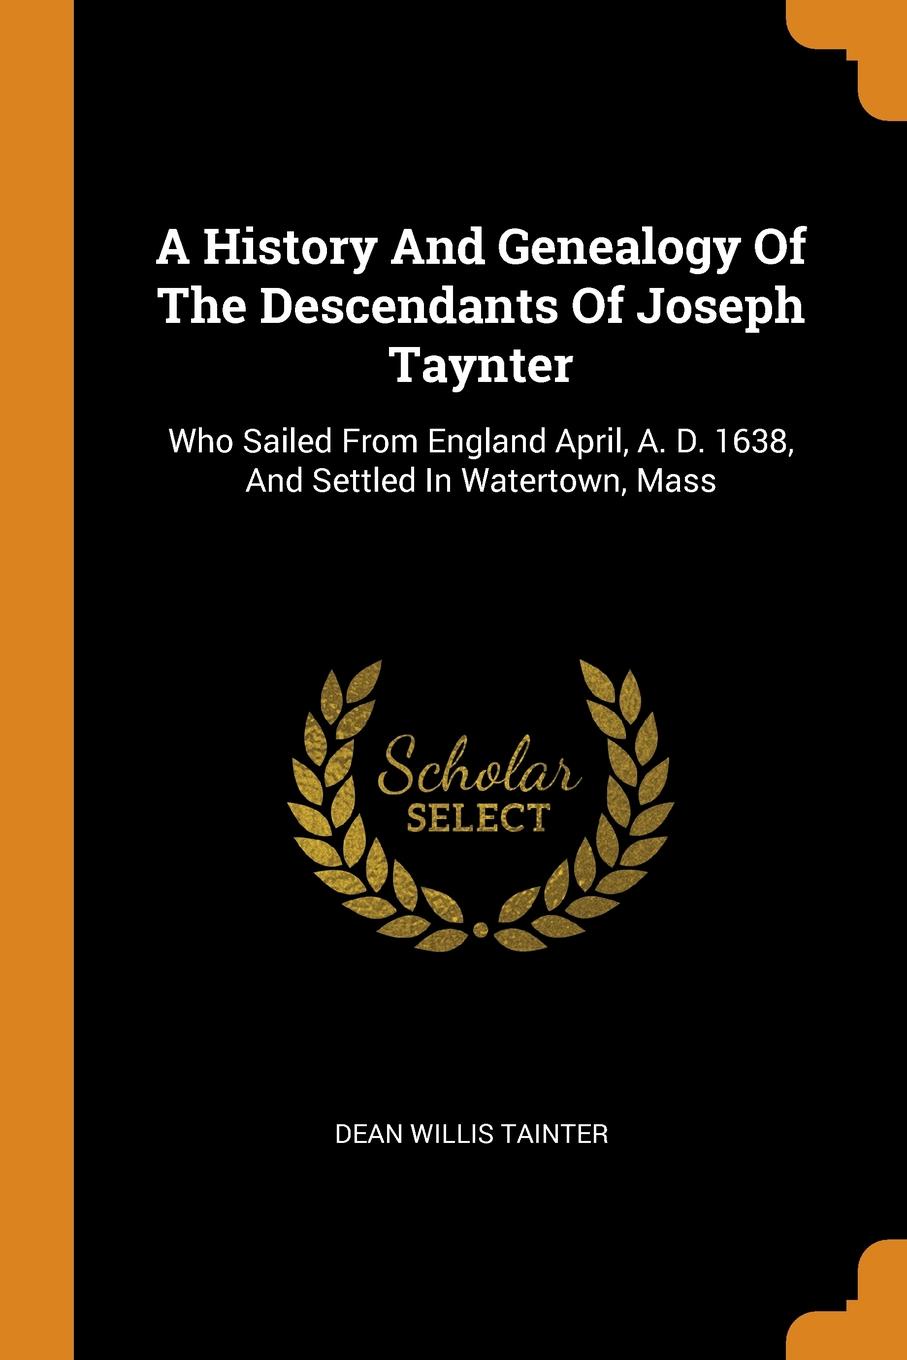 A History And Genealogy Of The Descendants Of Joseph Taynter. Who Sailed From England April, A. D. 1638, And Settled In Watertown, Mass